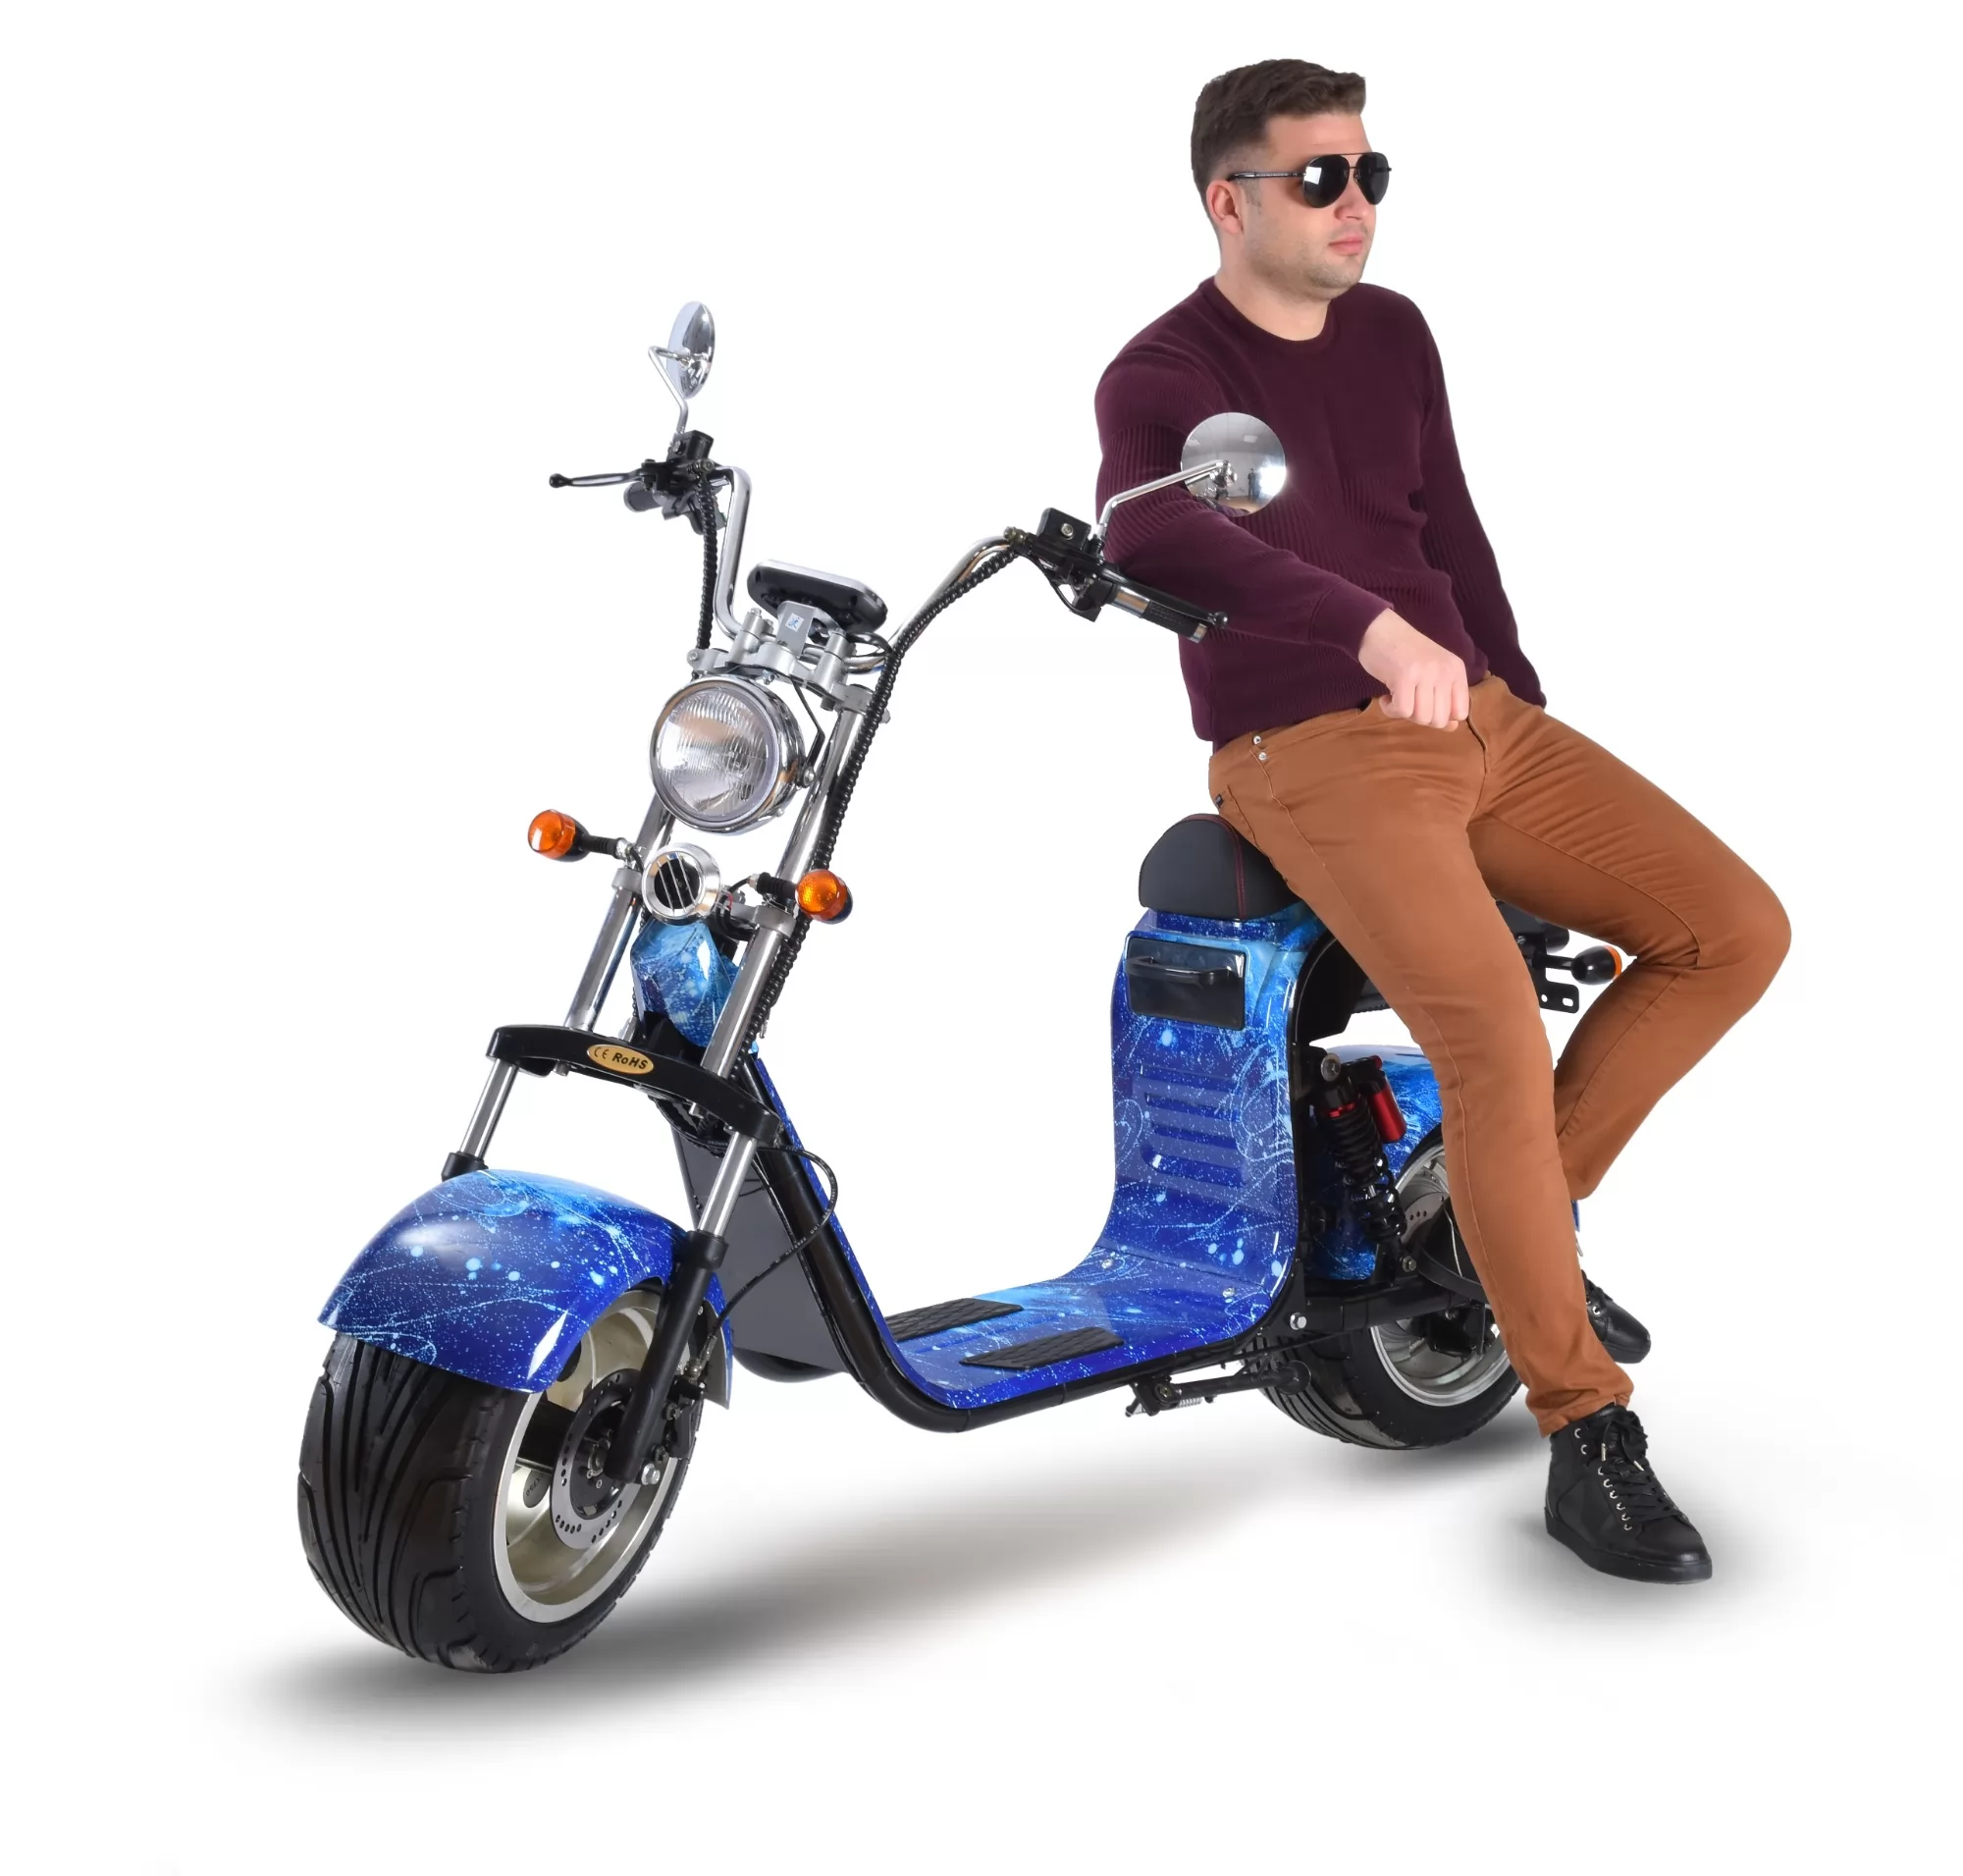 EEC COC seev citycoco 2000w 3000w electric scooter with fat bike tire HR8-2